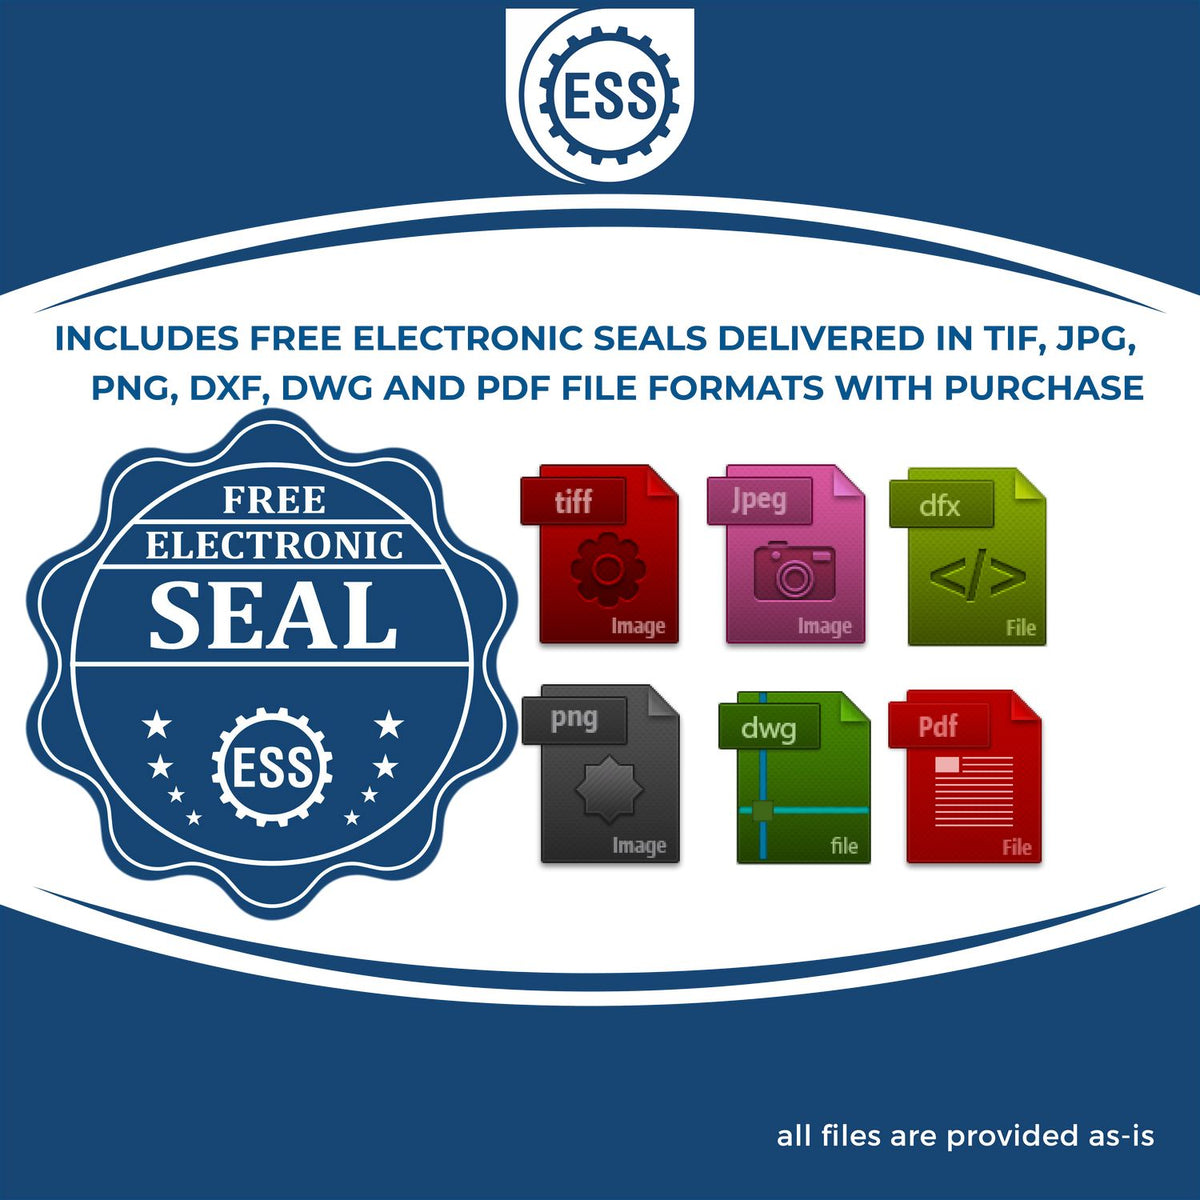 An infographic for the free electronic seal for the Gift Maine Architect Seal illustrating the different file type icons such as DXF, DWG, TIF, JPG and PNG.